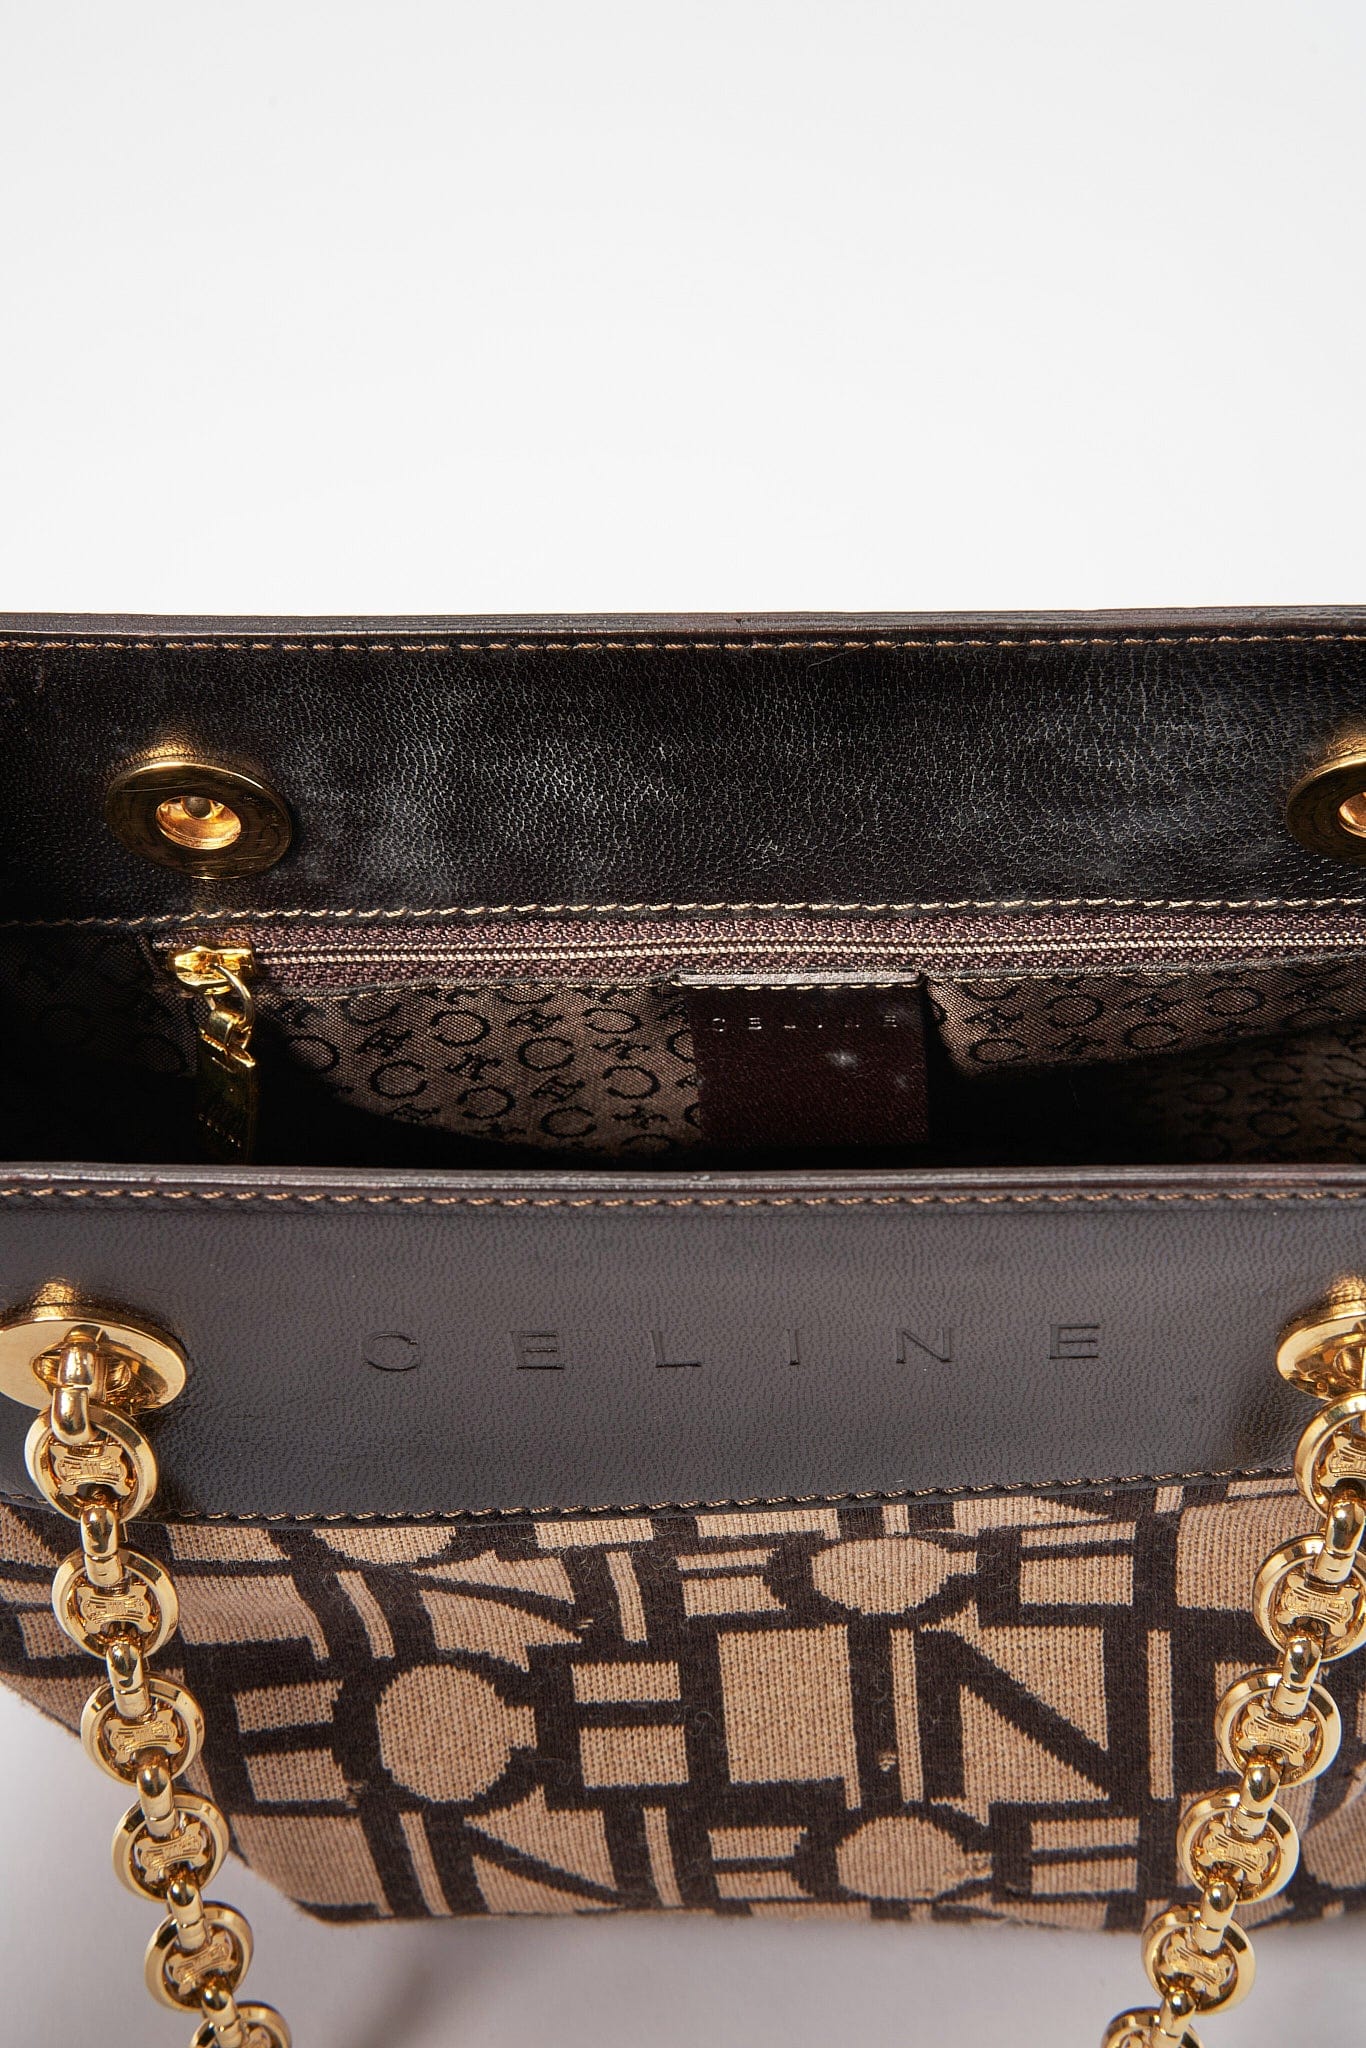 Vintage Celine Bag with Triomphe Chain Handle